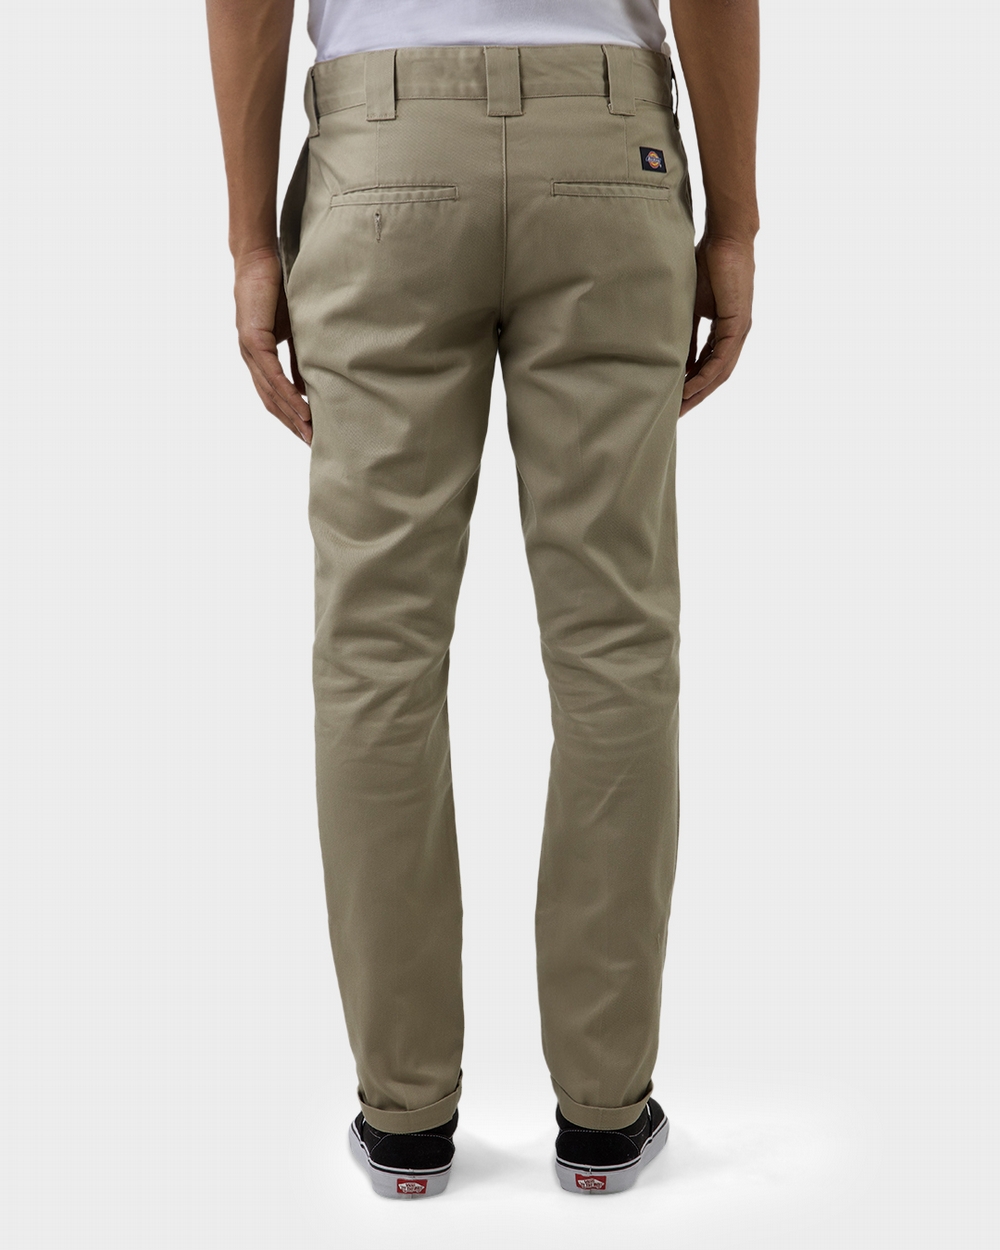 The Stronghold 1895 Mens Khaki Pants Size 32x32 Tan Relaxed Tapered NWT  Quality! | eBay